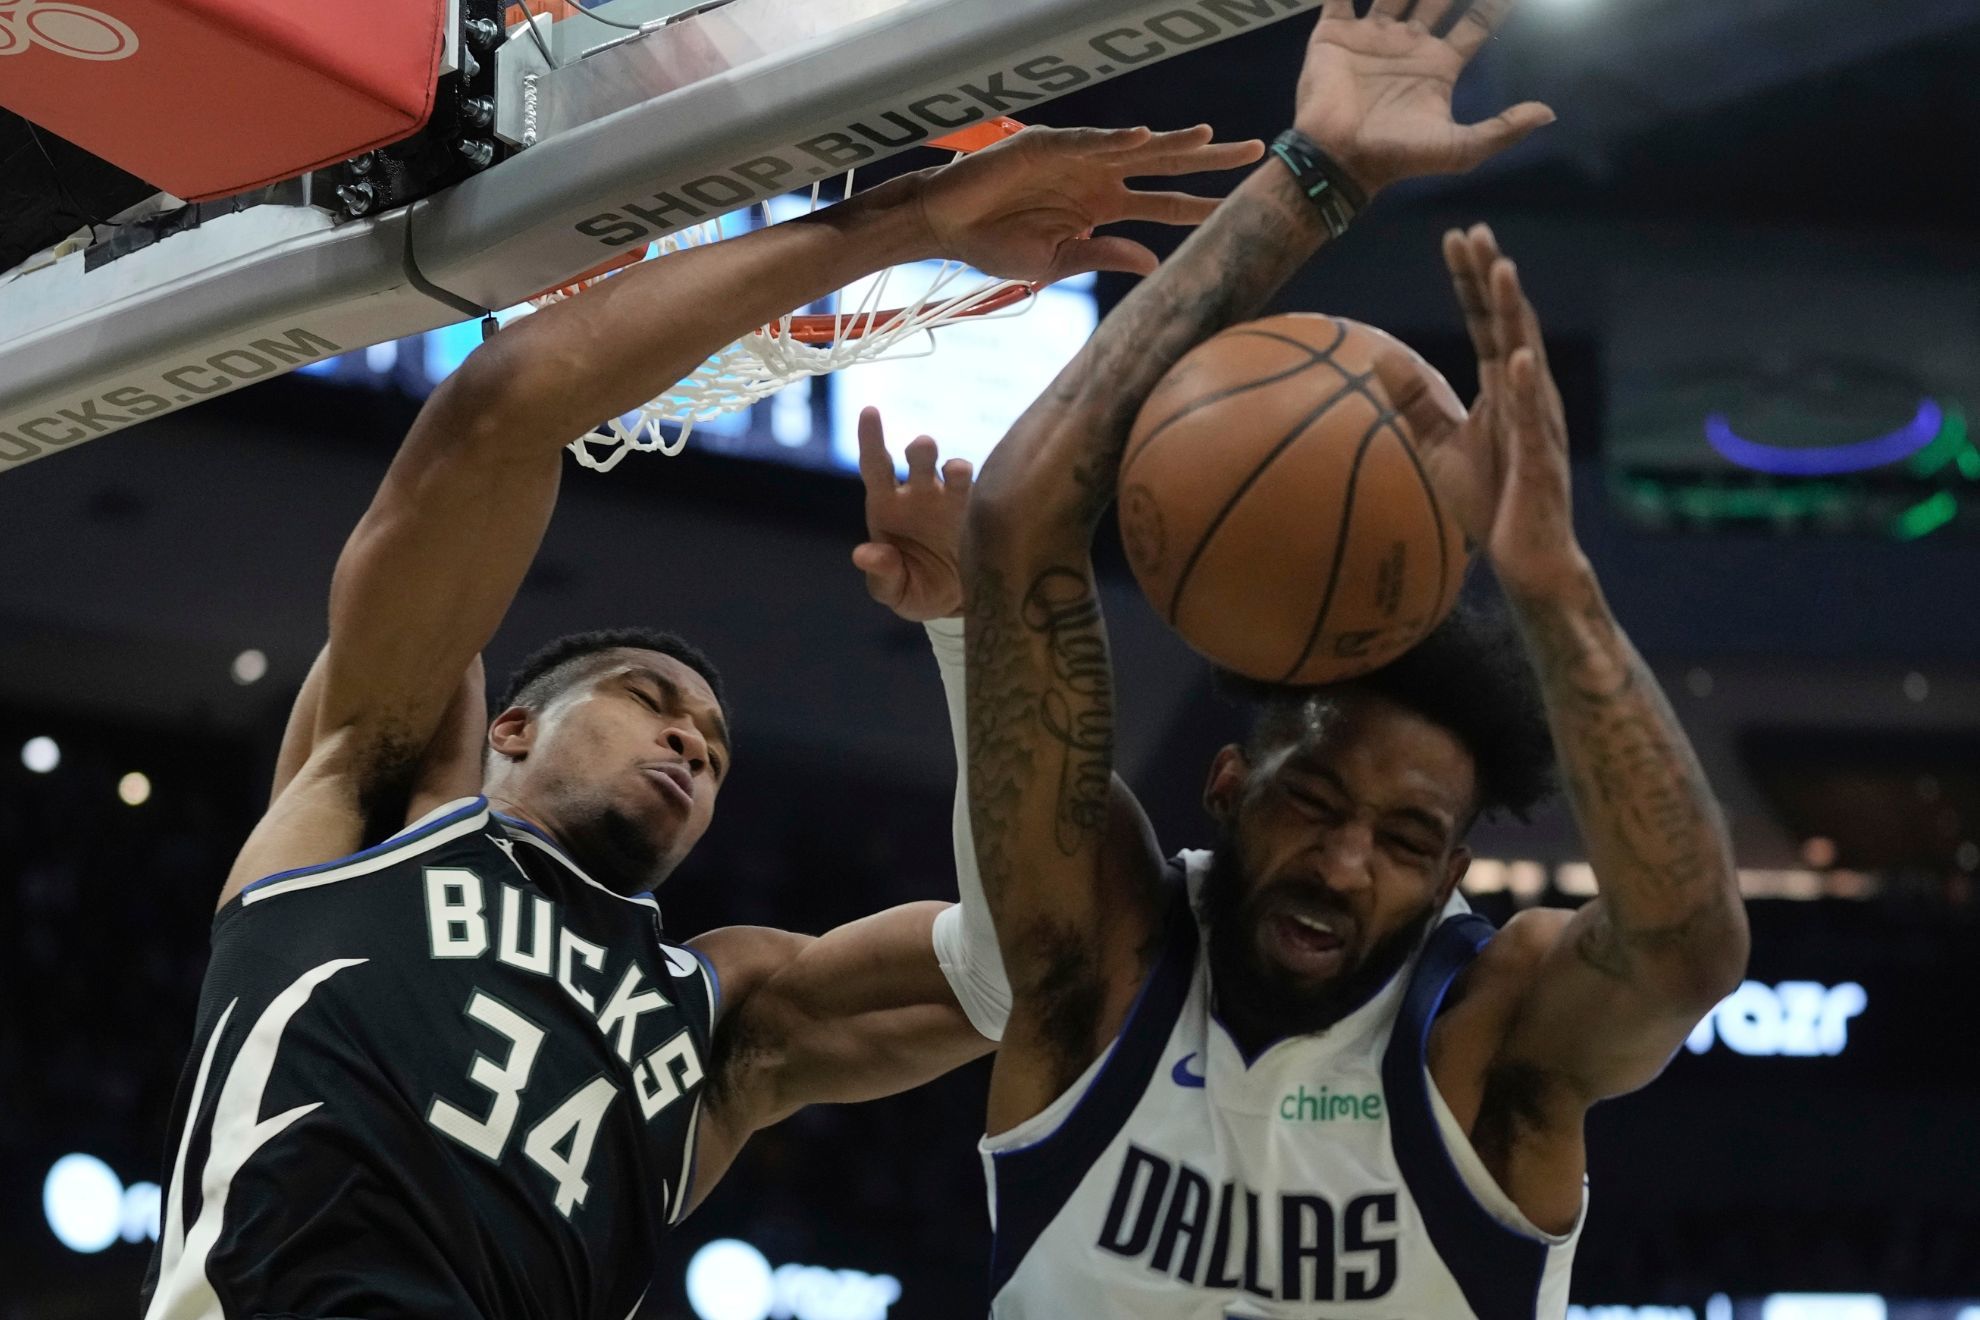 Giannis scores 40, Dame helps as Bucks top Mavs in battle vs. Luka and Kyrie